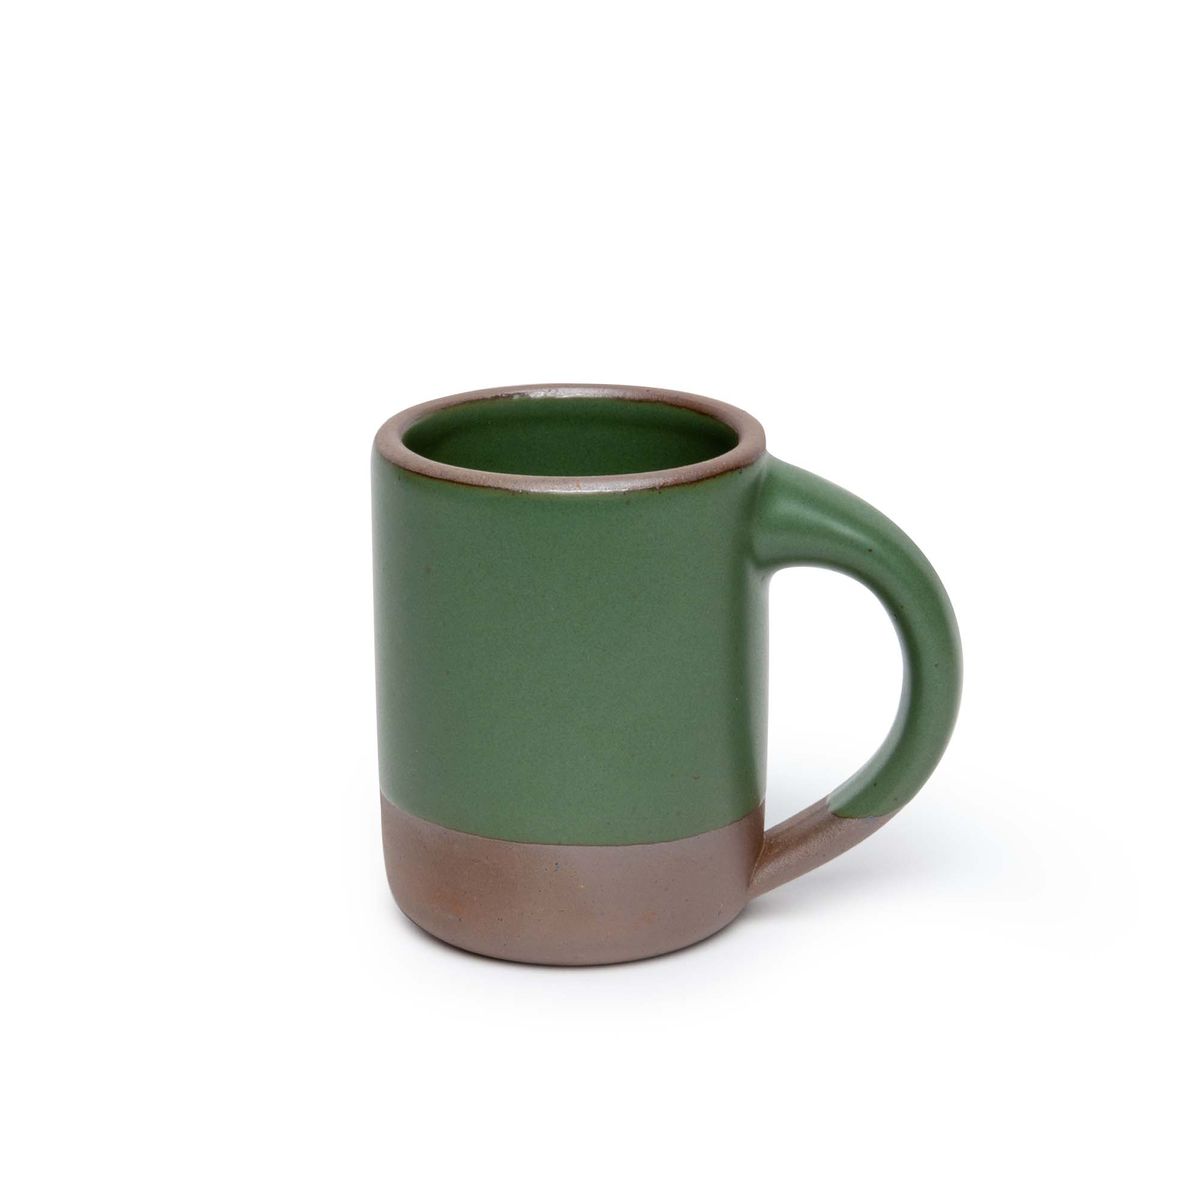 A medium sized ceramic mug with handle in a deep, verdant green color featuring iron speckles and unglazed rim and bottom base.